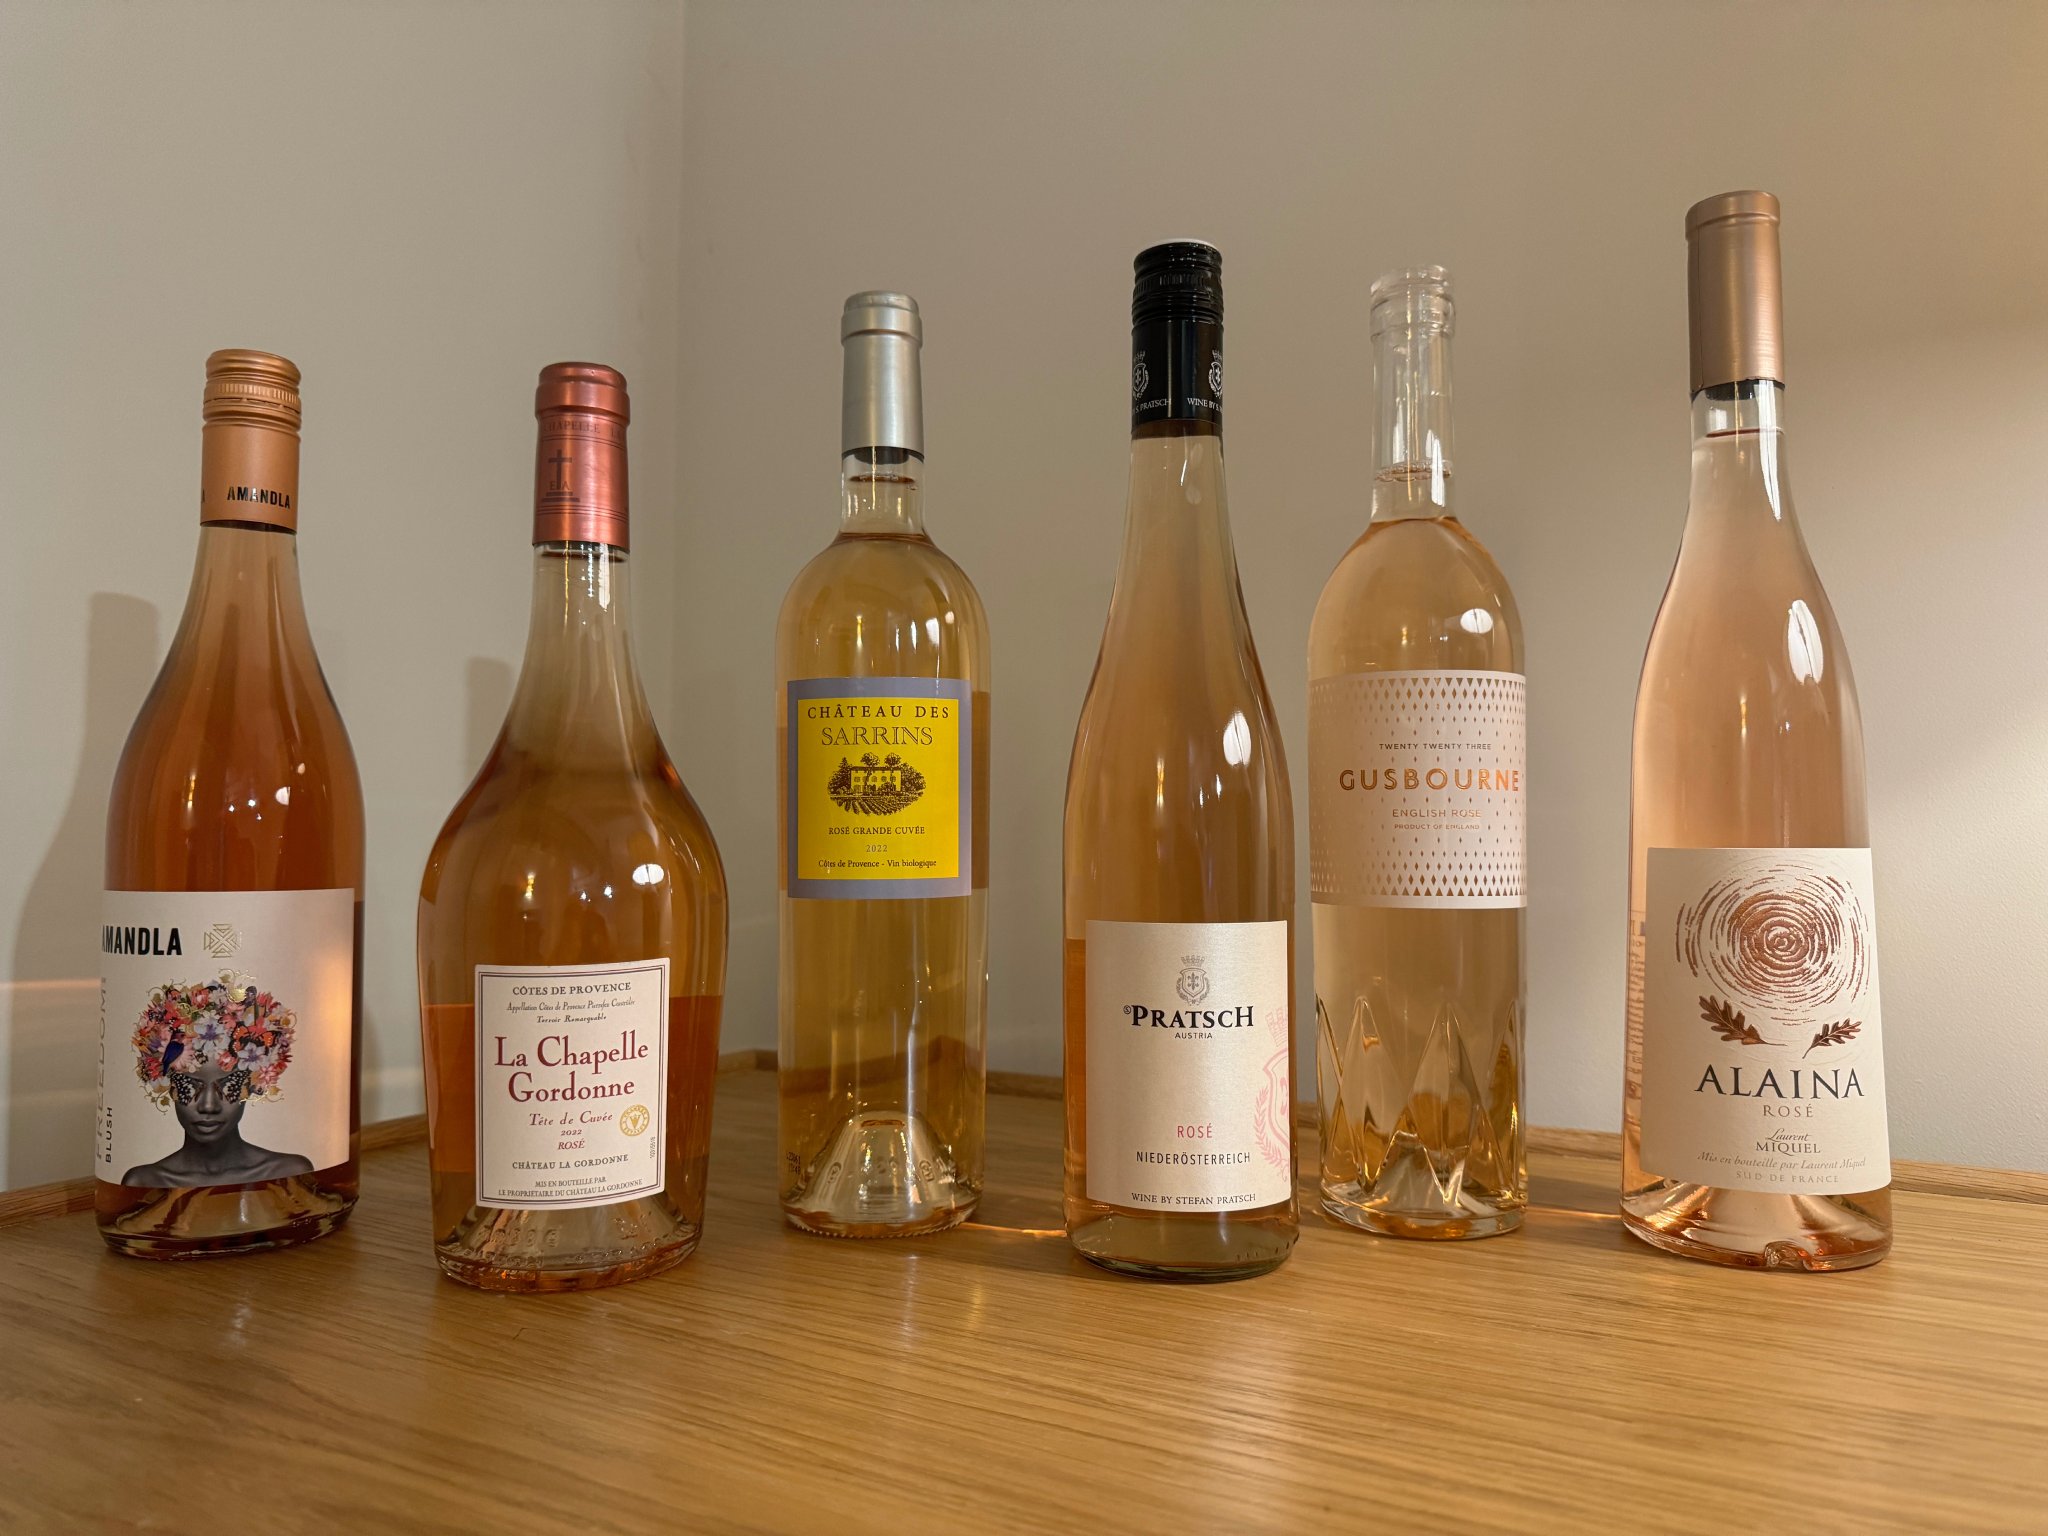 We taste tested rosés from around the world